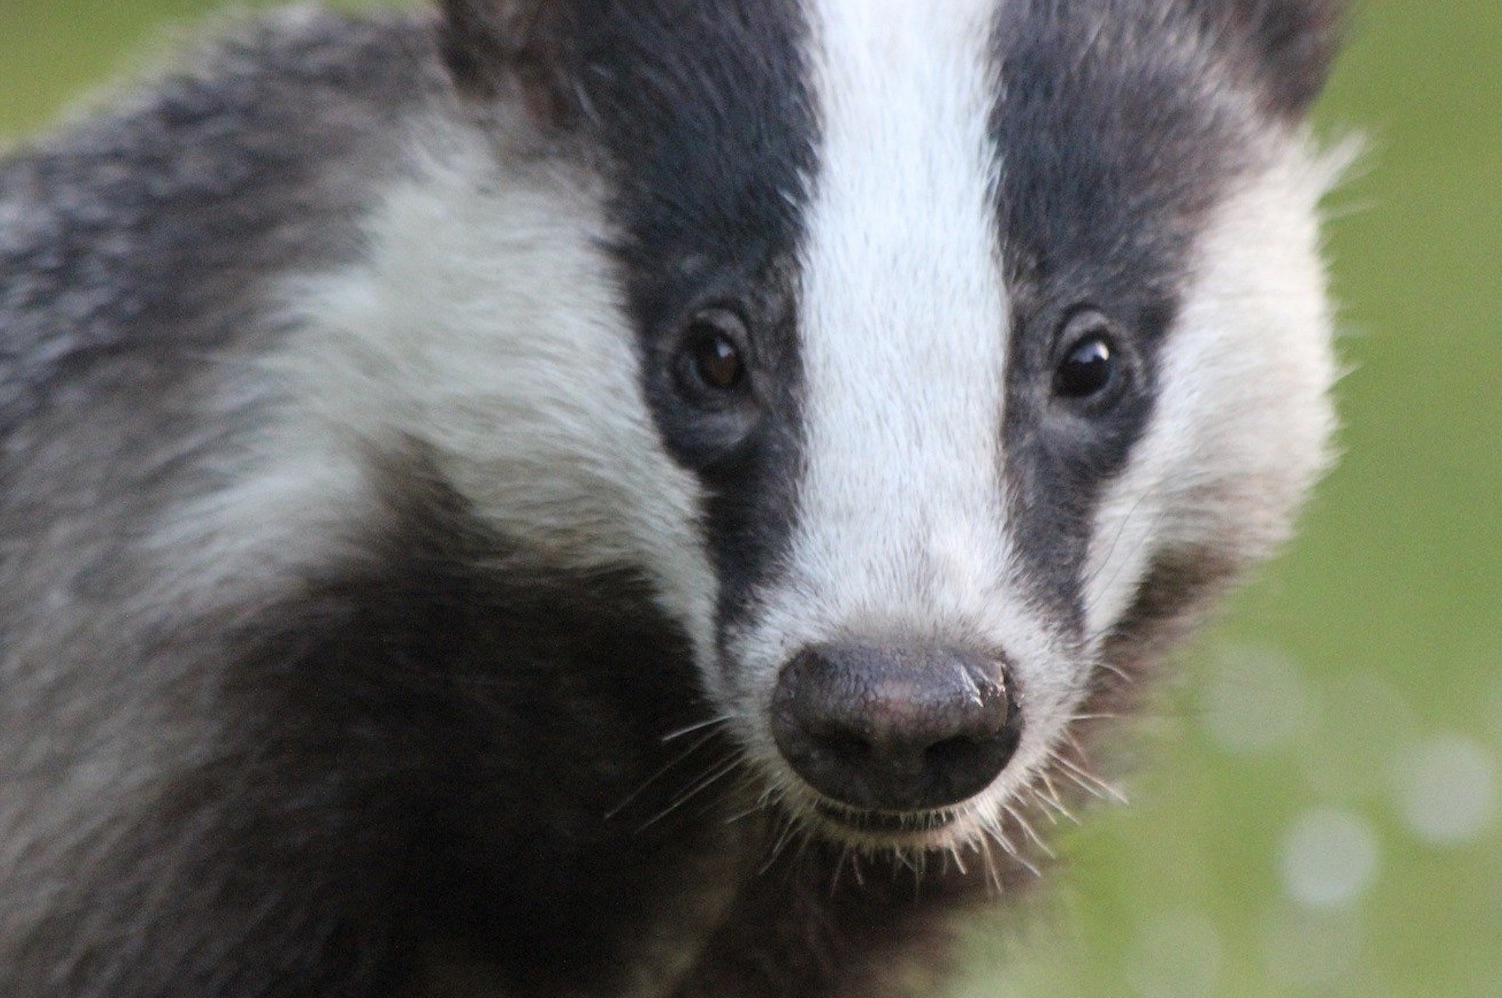 Killed for a clean shave: Why the badger deserves better from the male  grooming industry